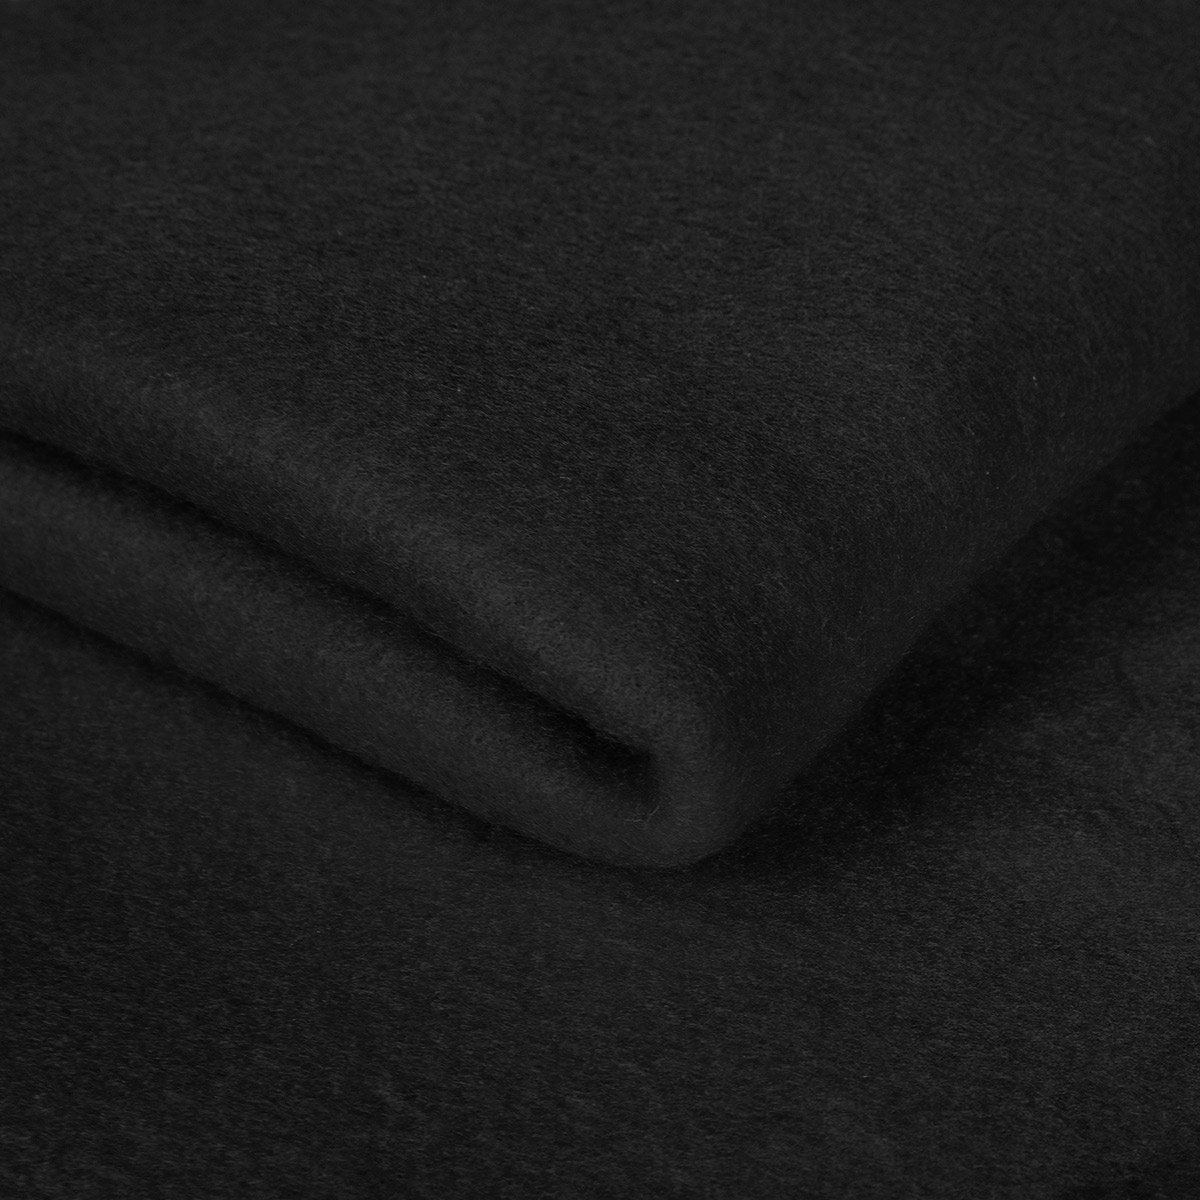 Black Felt Fabric Soft Texture for Craft Projects, Sewing, Padding DIY 